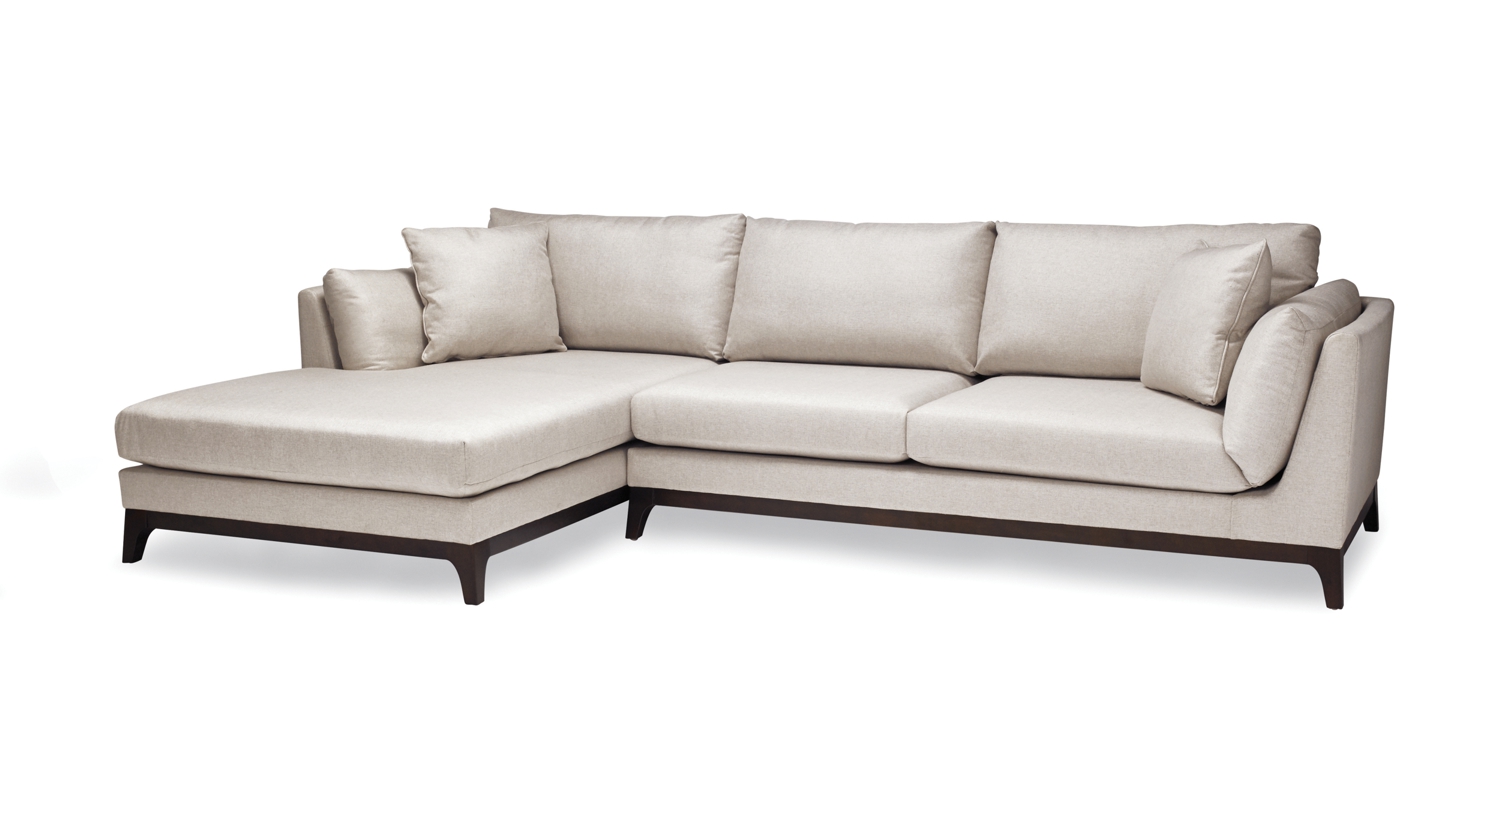 Grey pearl sectional sofa with five half seats is made in Canada